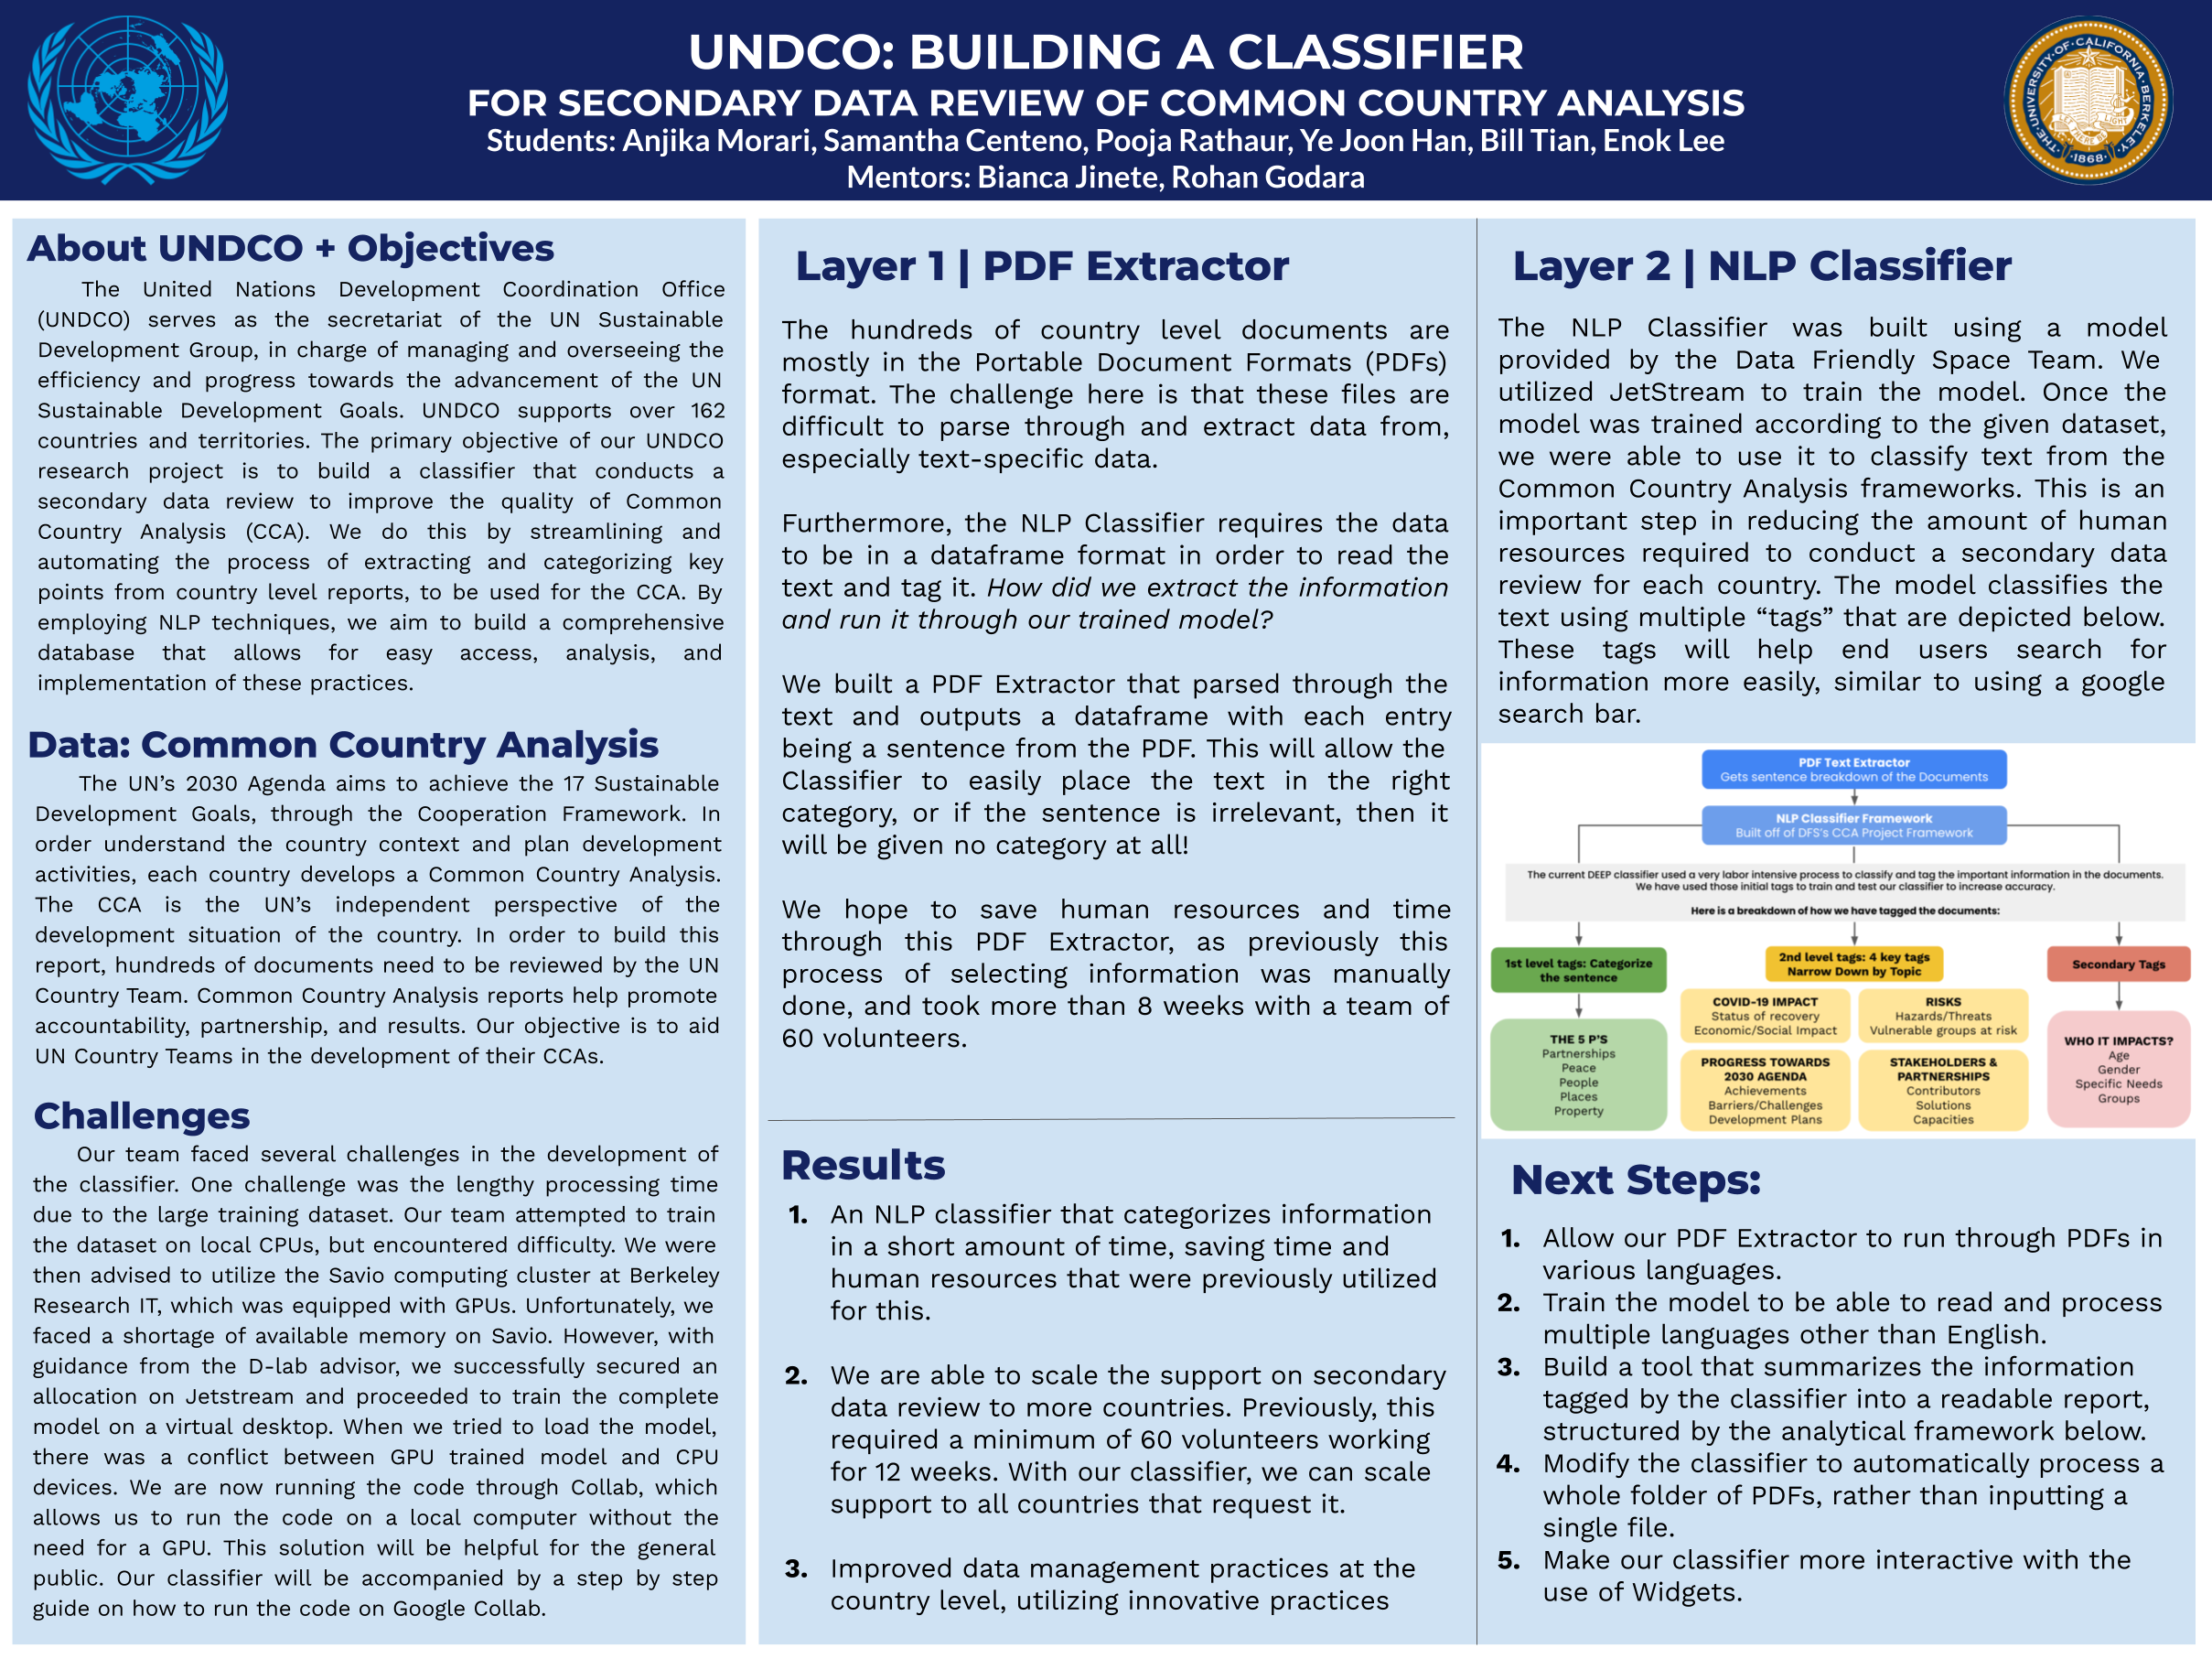 UNDCO: Building a Classifier for Secondary Data Review of Common Country Analysis – Spring 2023 Discovery Project